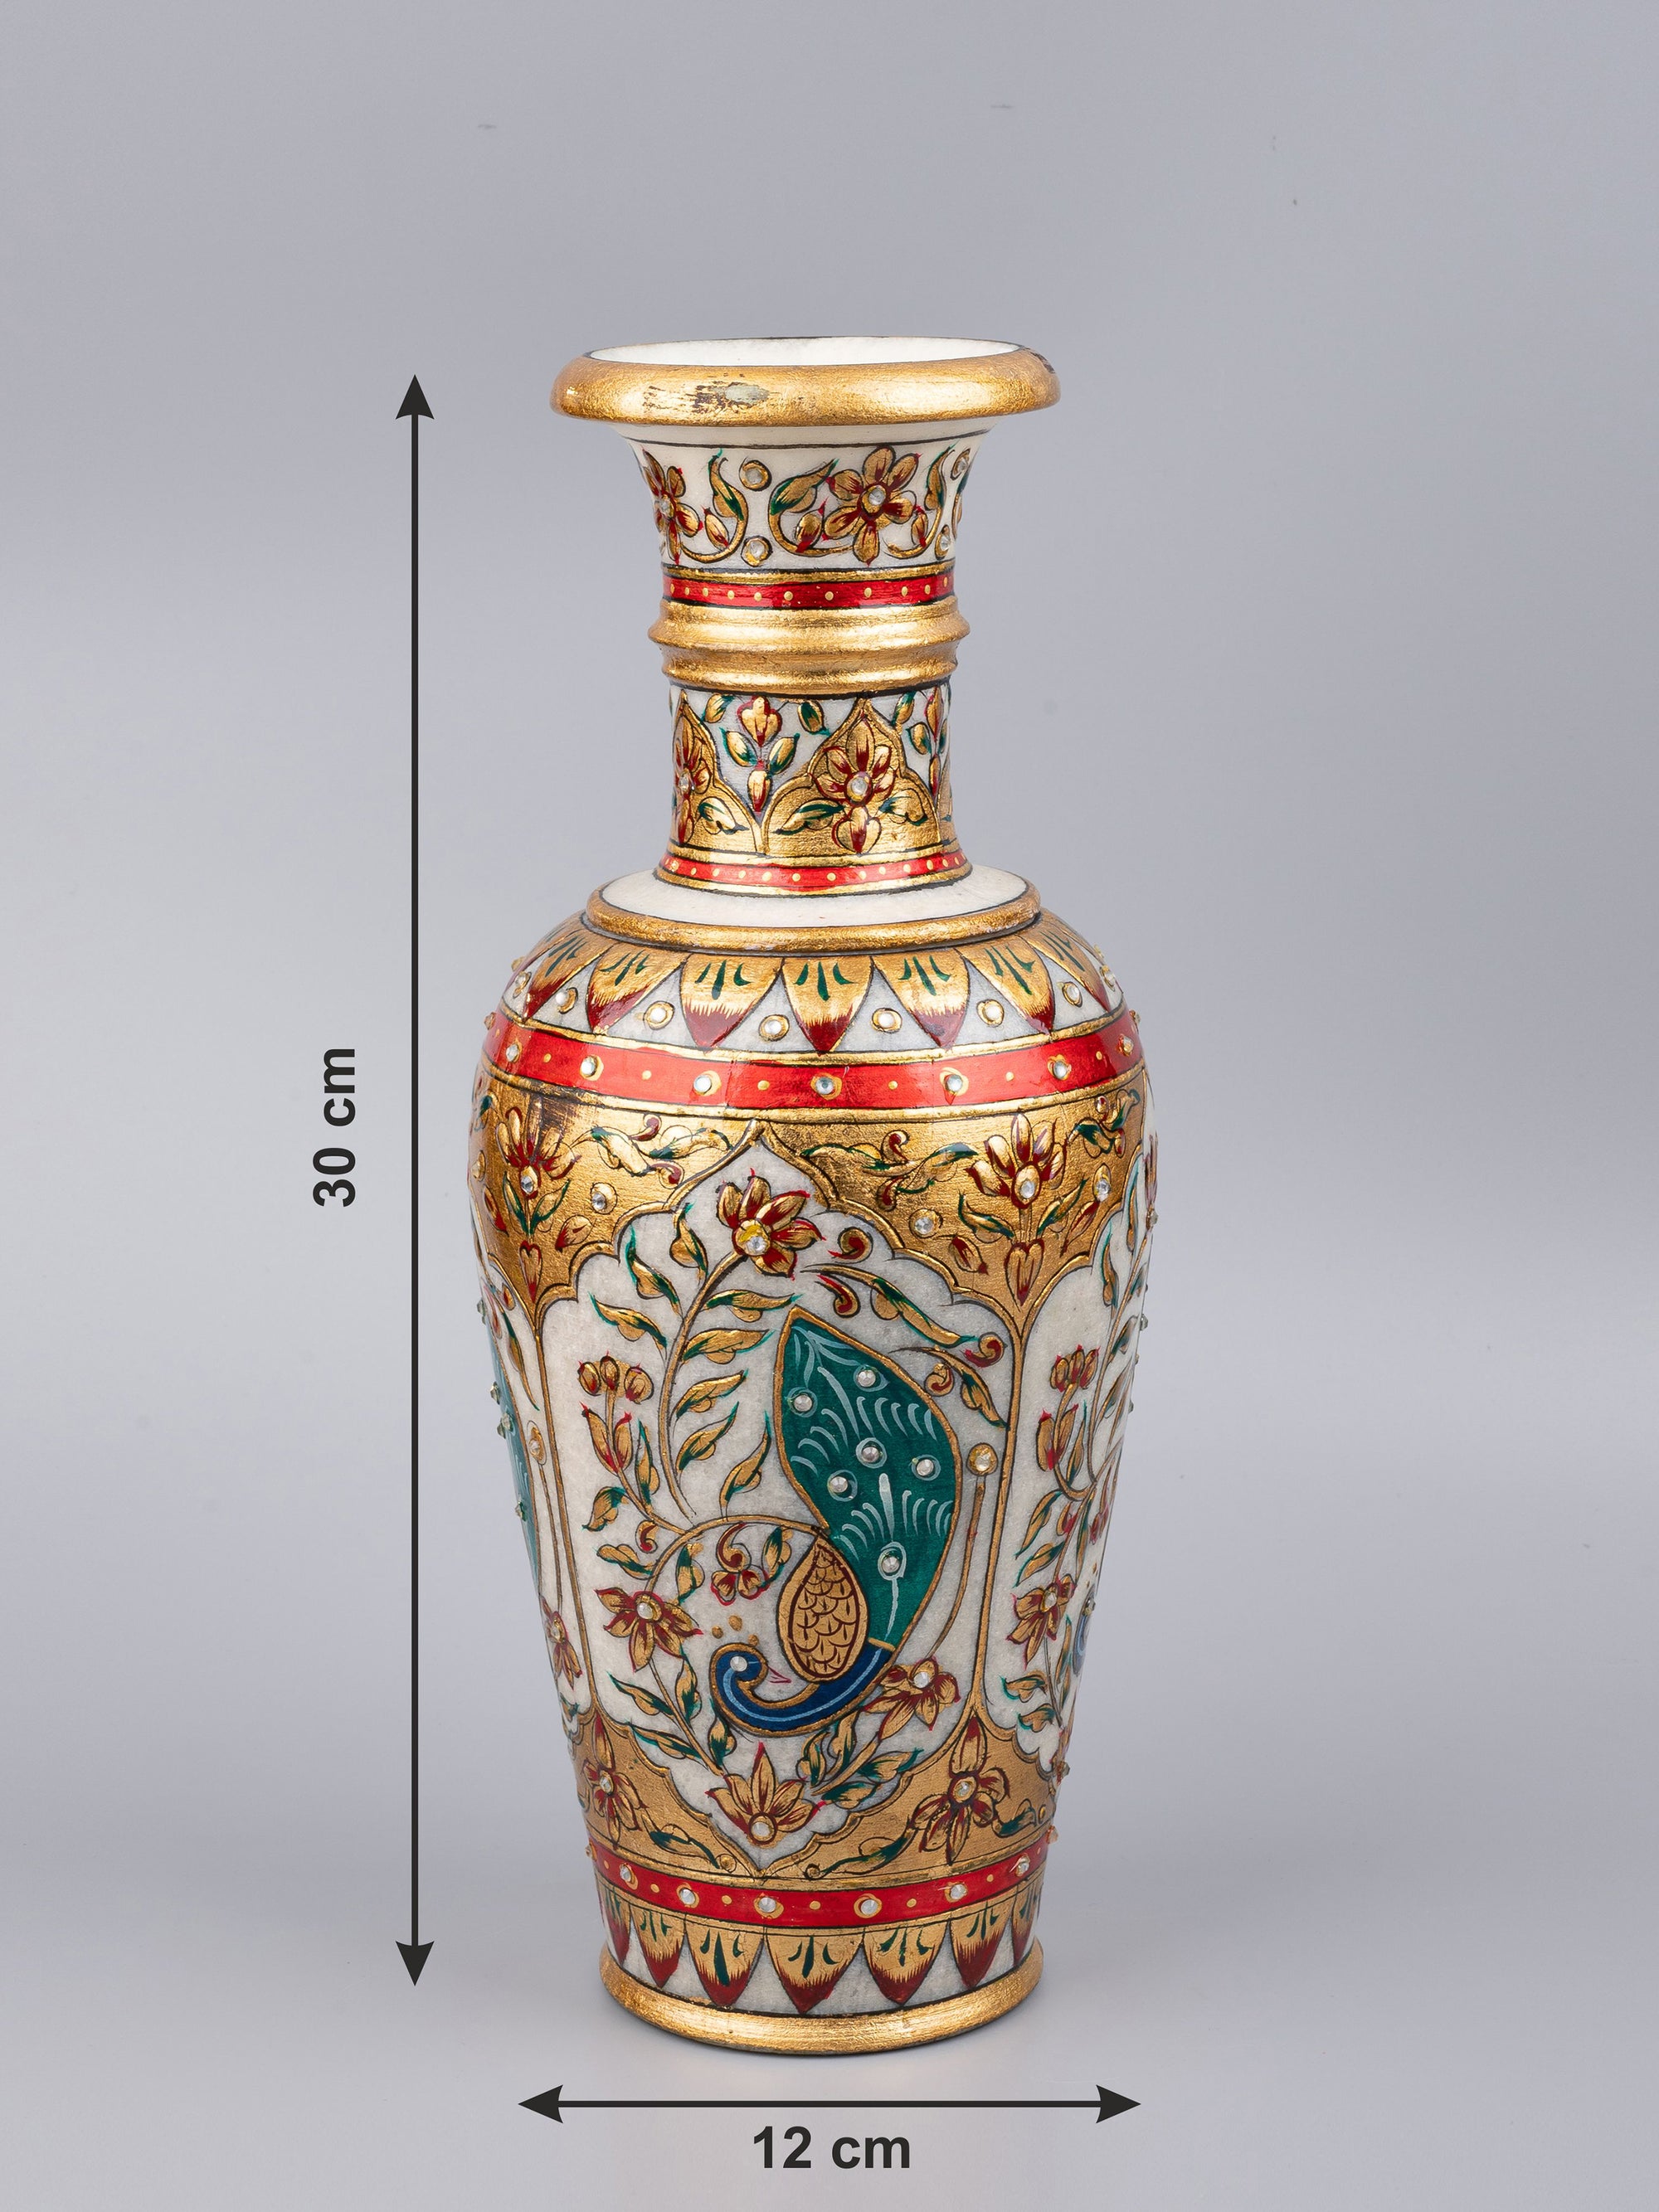 12 inches flower vase handcrafted out of marble with colorful meenakari painting - The Heritage Artifacts